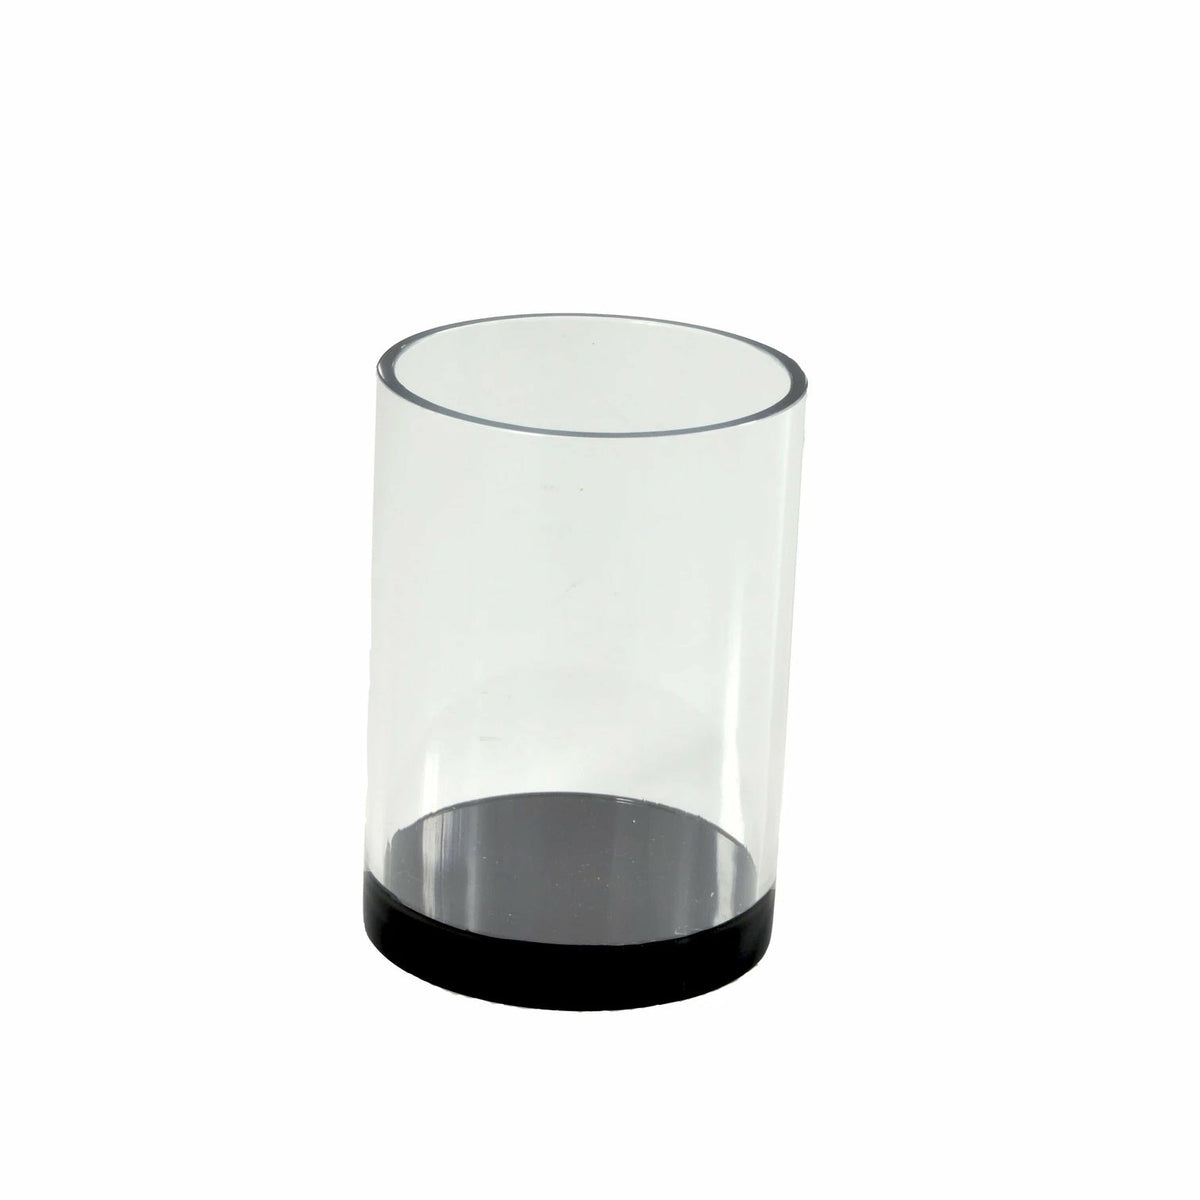 Mike and Ally Ice Lucite Bath Accessories Tumbler Black